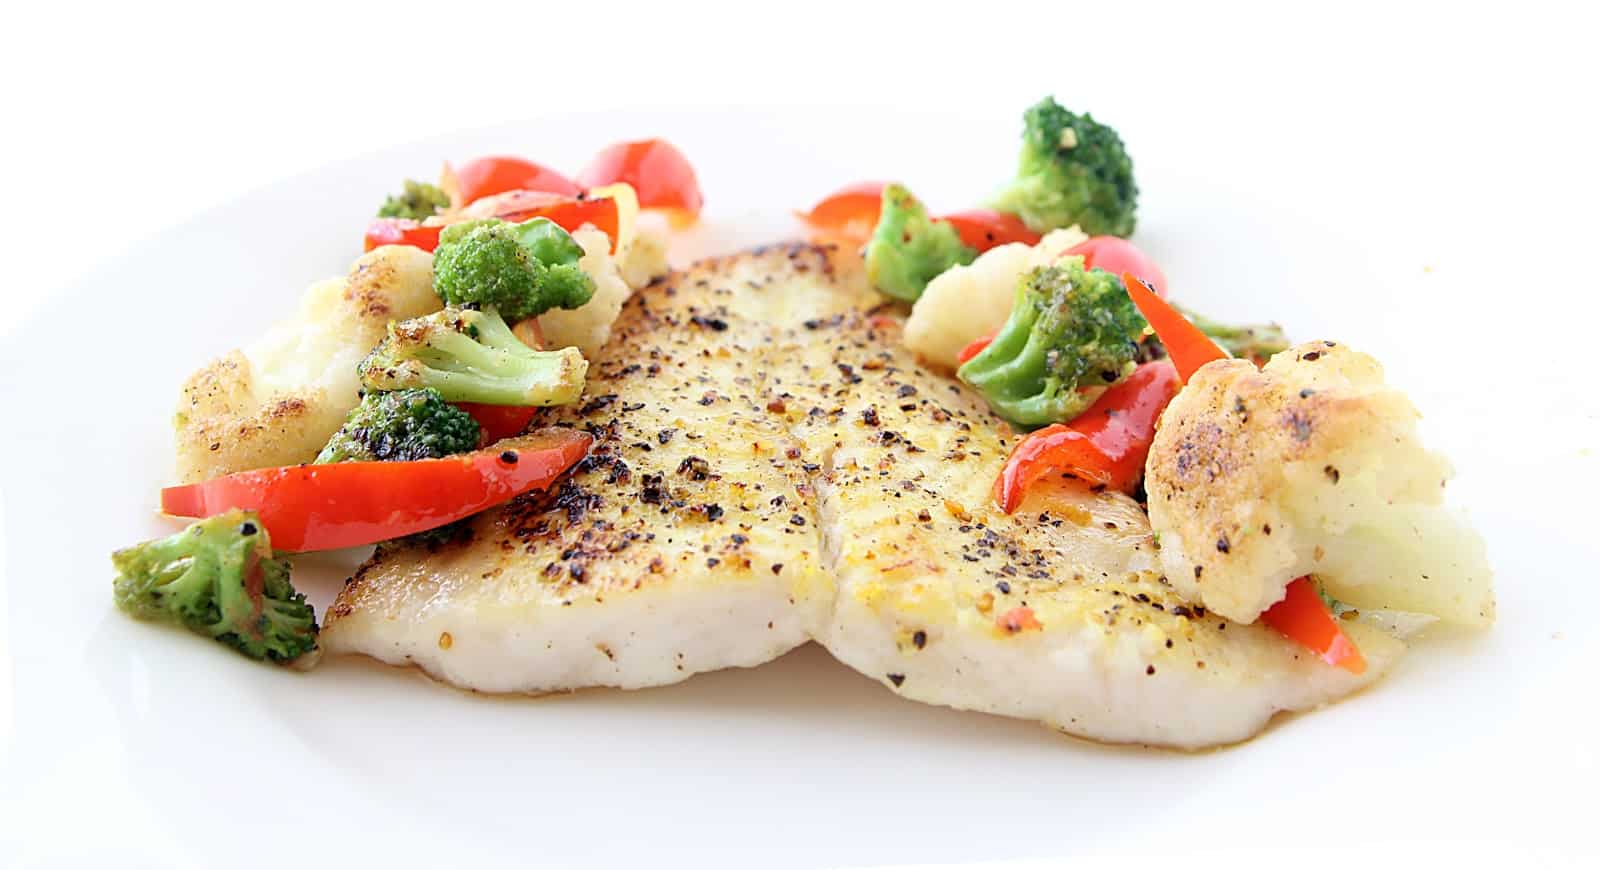 What is a simple recipe for cooking tilapia?